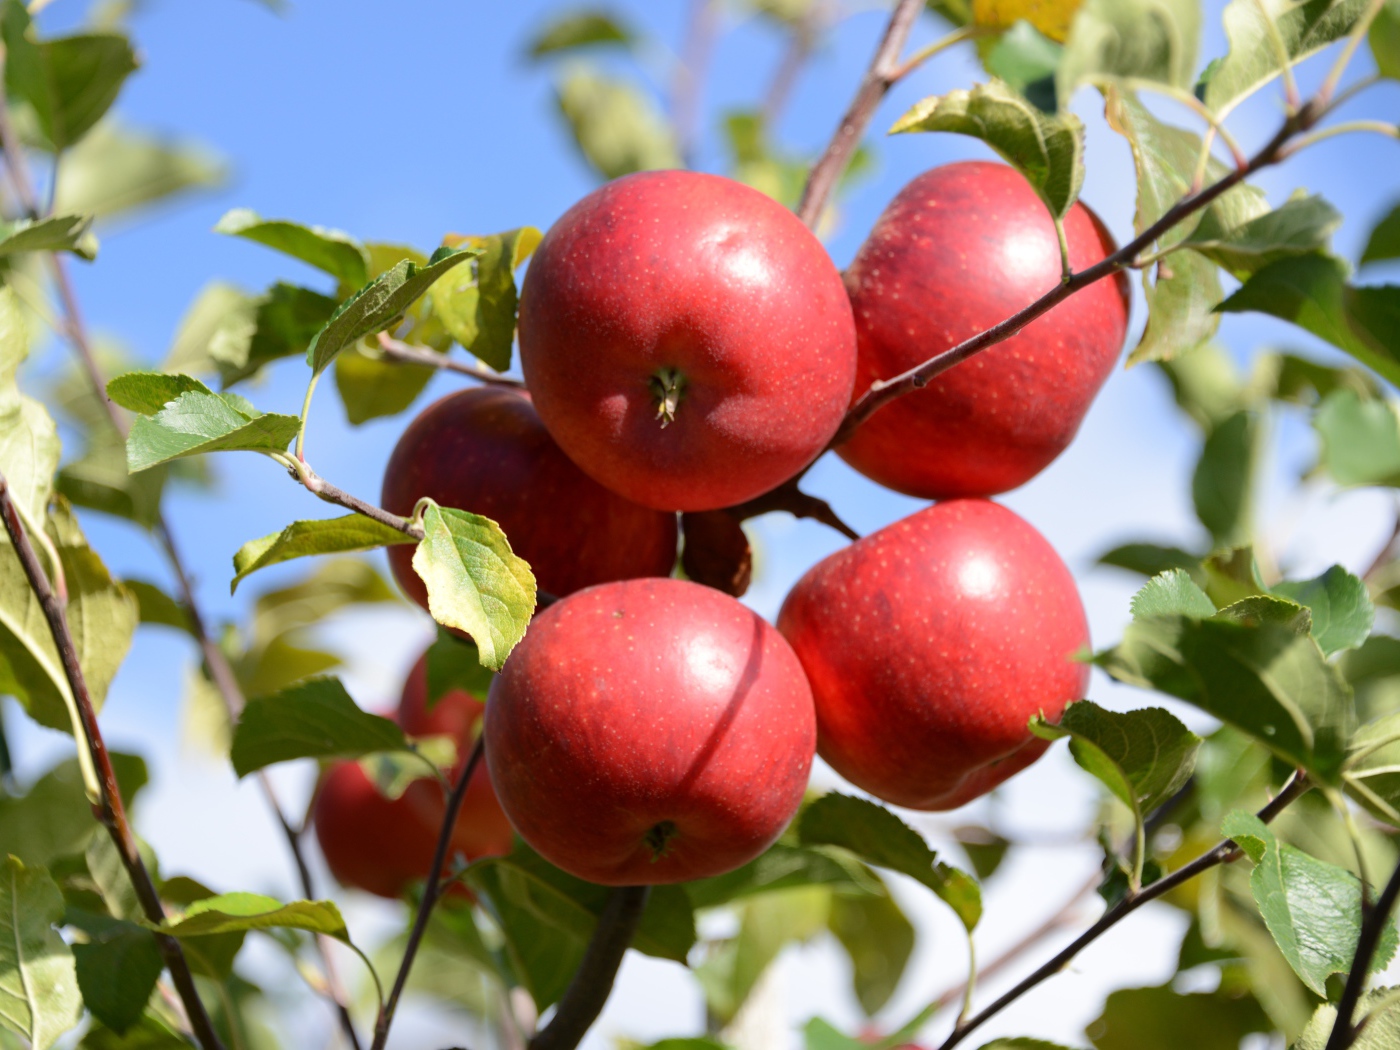 Many red apples in green leaves